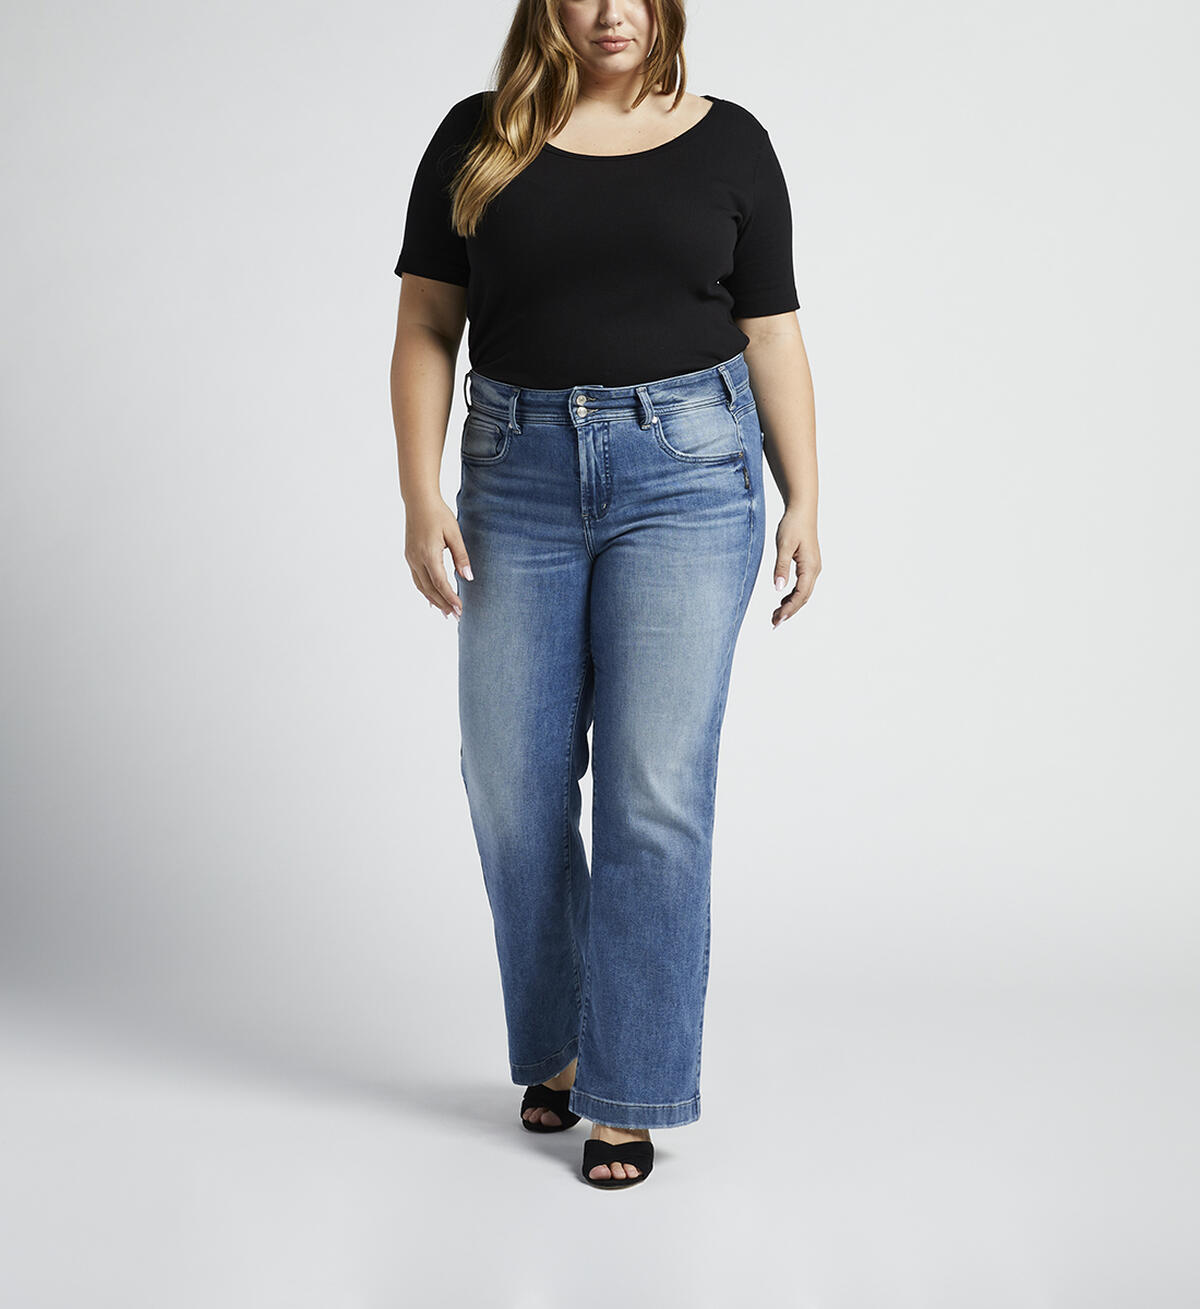 Avery High Rise Trouser Leg Jeans Plus Size, , hi-res image number 0